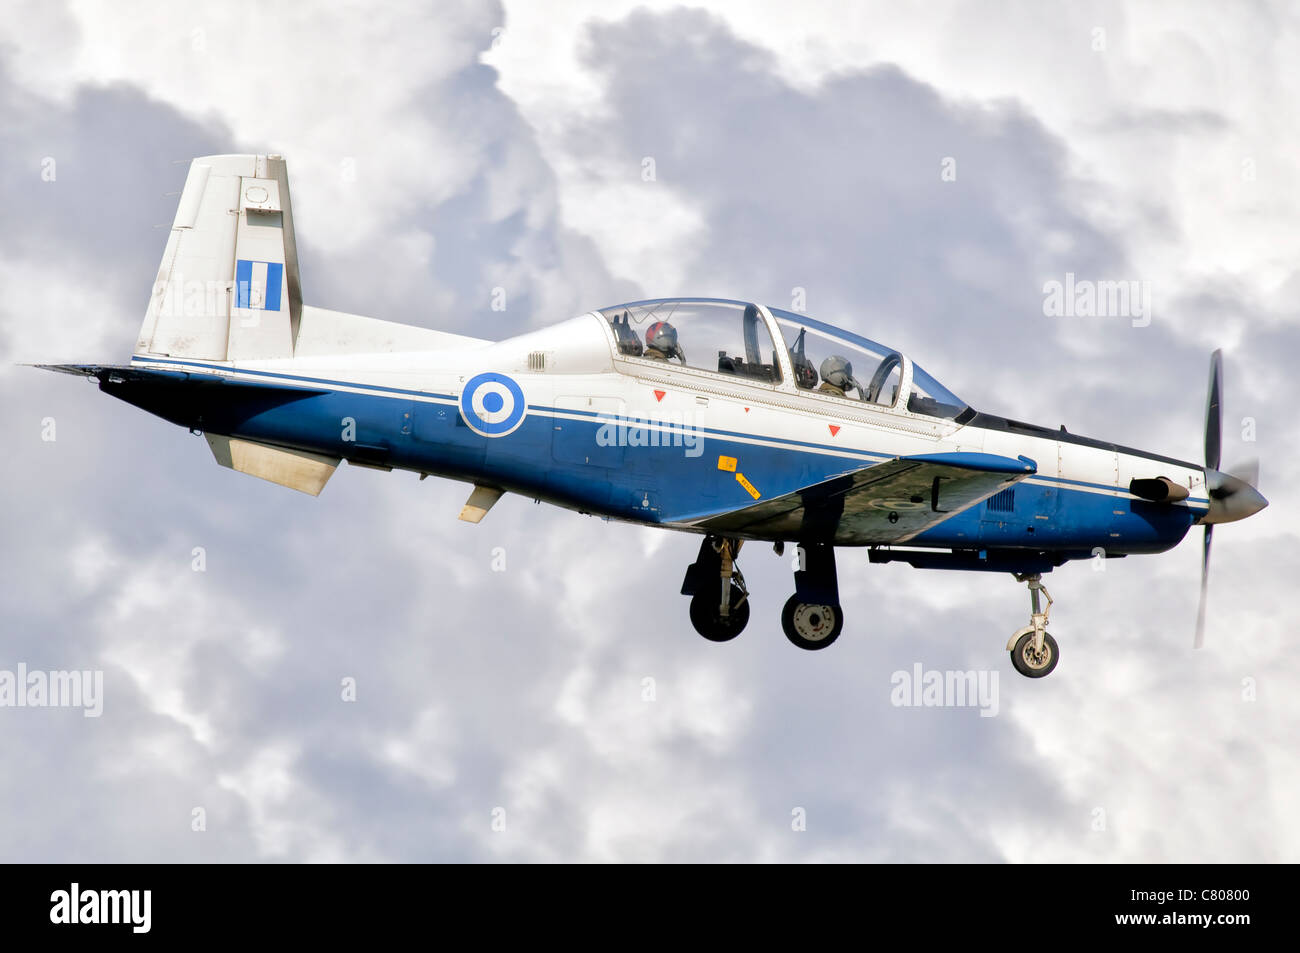 A Hellenic Air Force T-6 Texan II prepares to land at Kalamata Air Base, Greece, after a training mission. Stock Photo